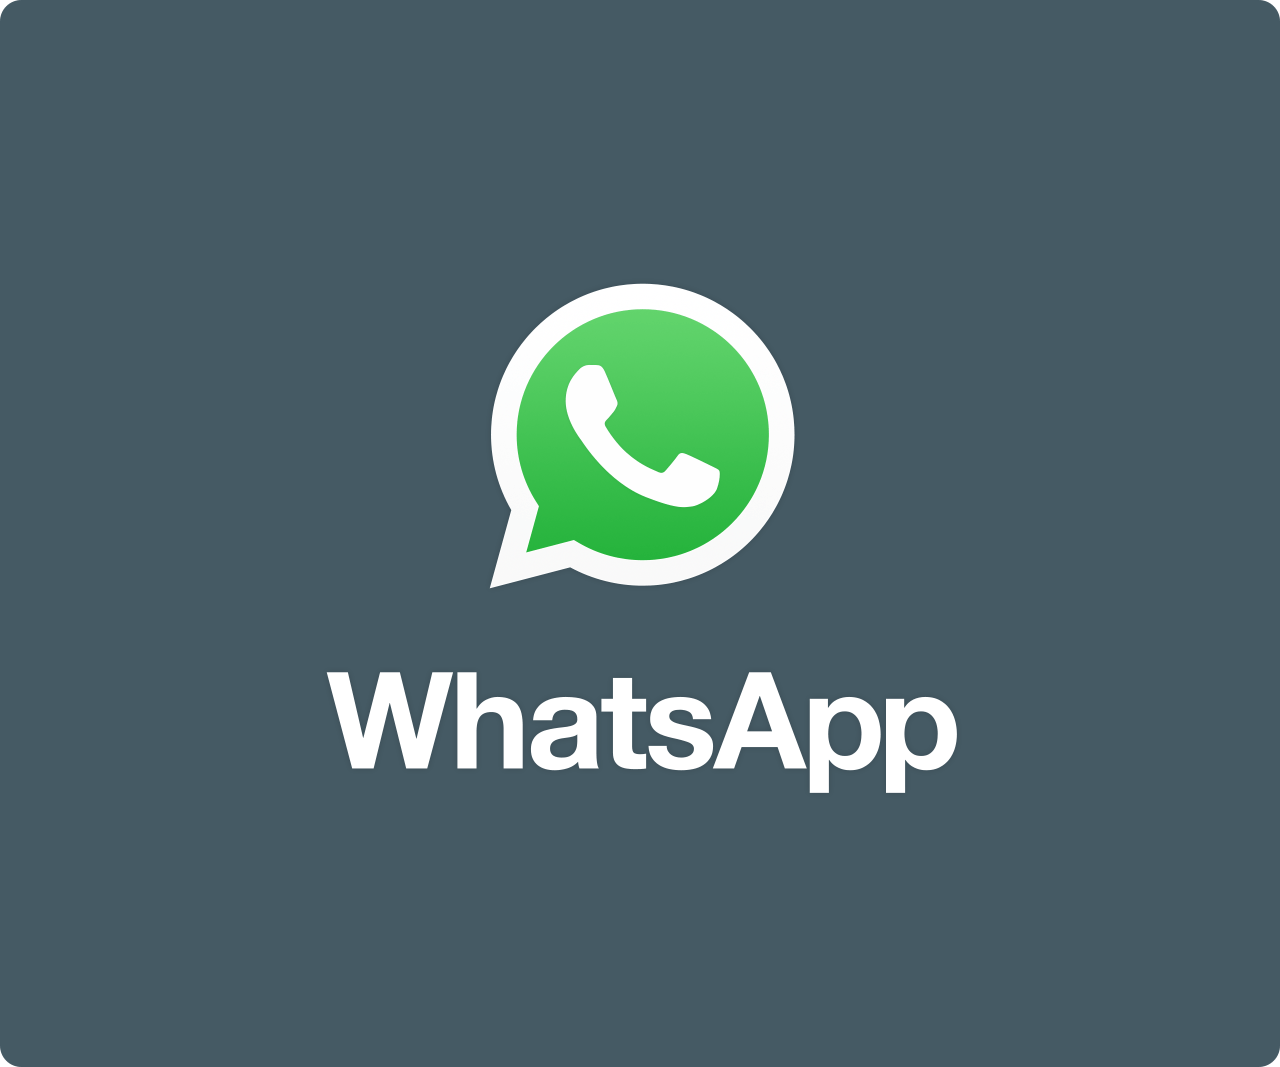 With Green Speech Bubble Phone Logo - WhatsApp Brand Resources